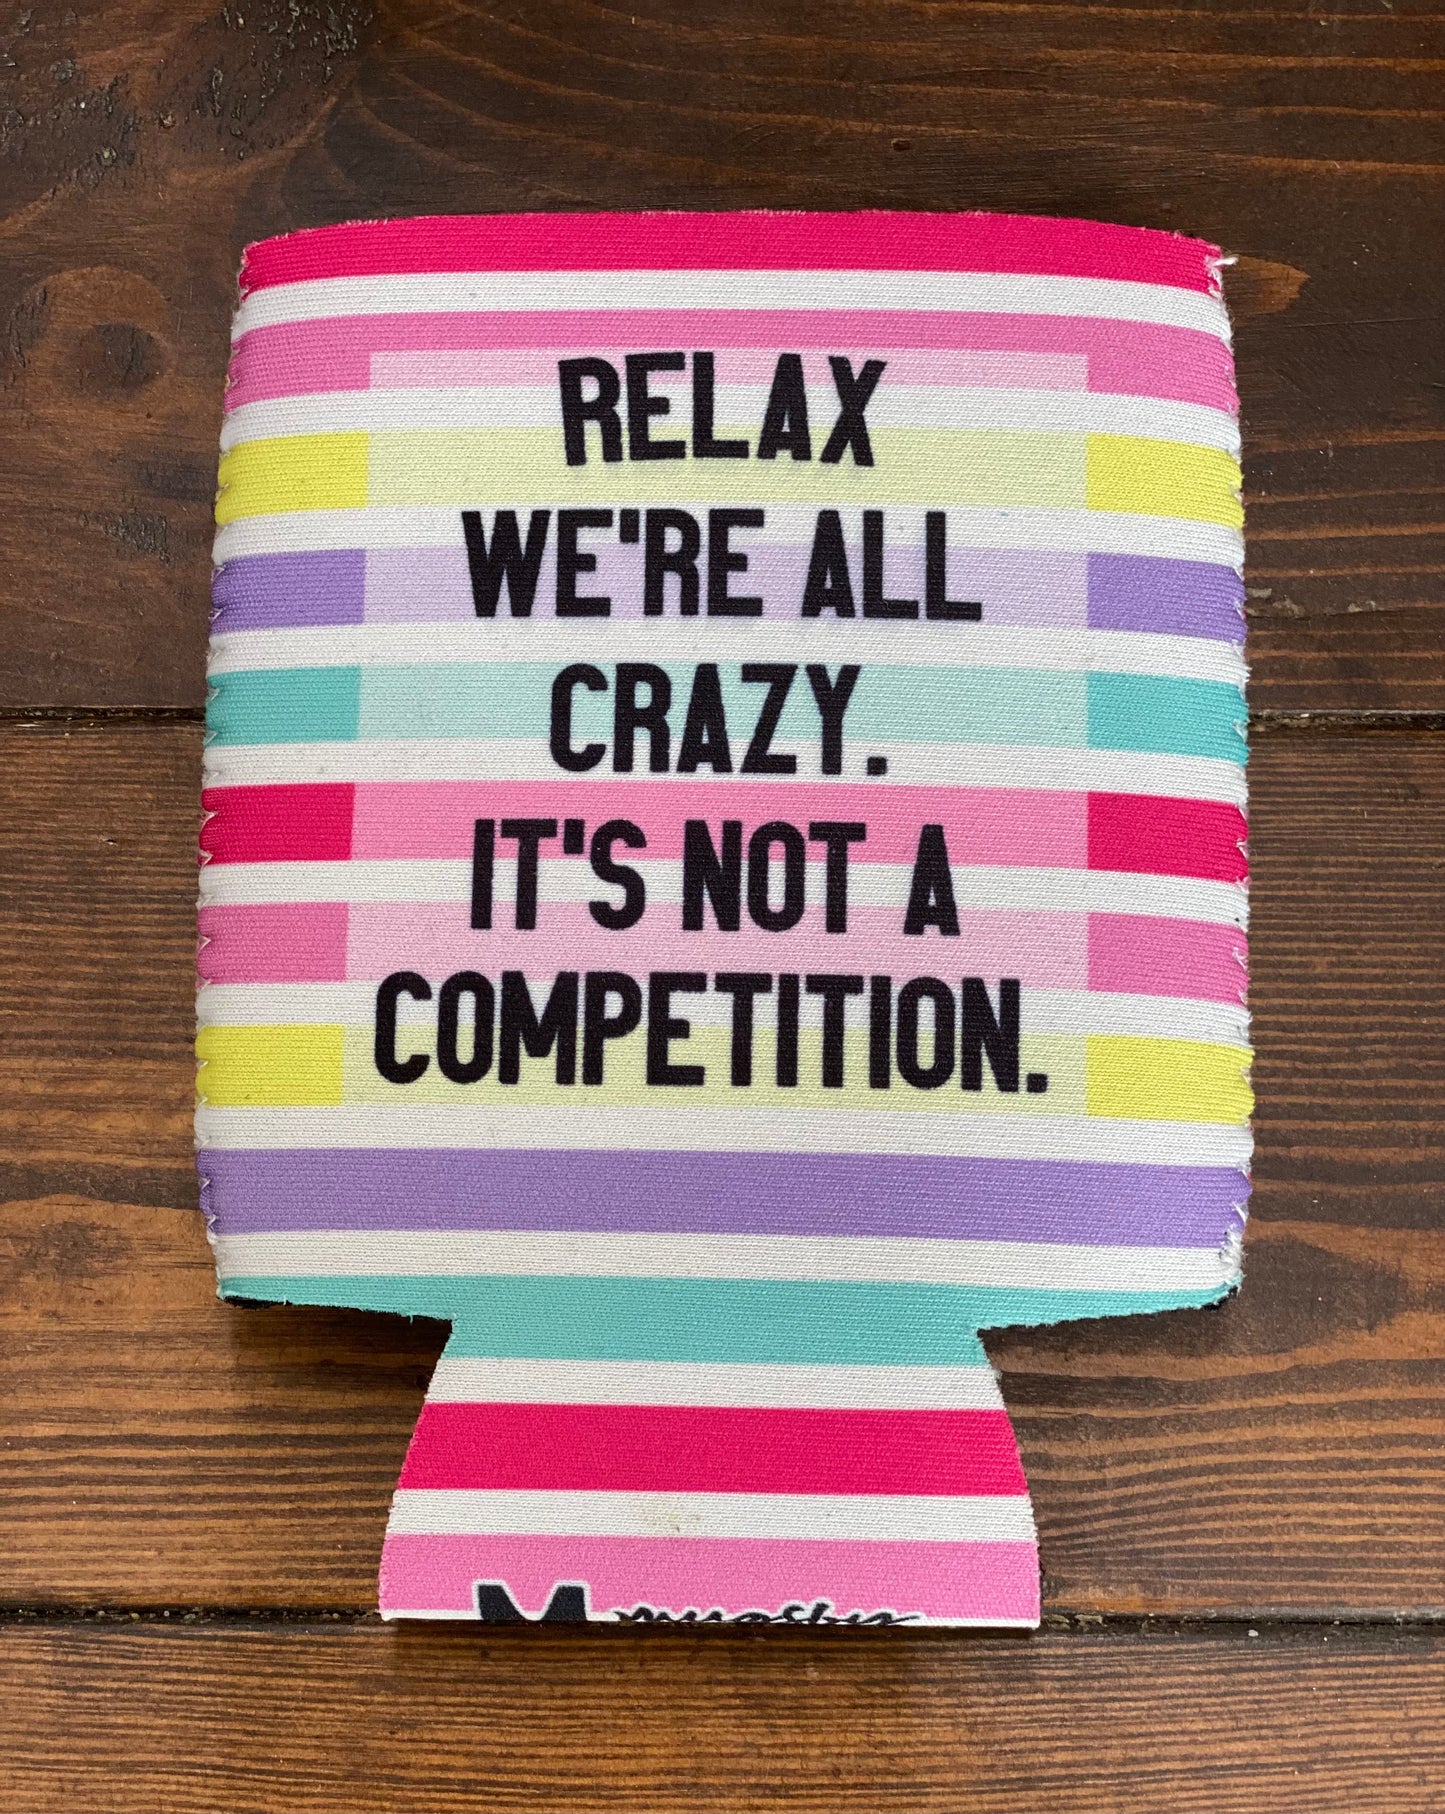 Neoprene Can Cool “Relax We’re All Crazy…”